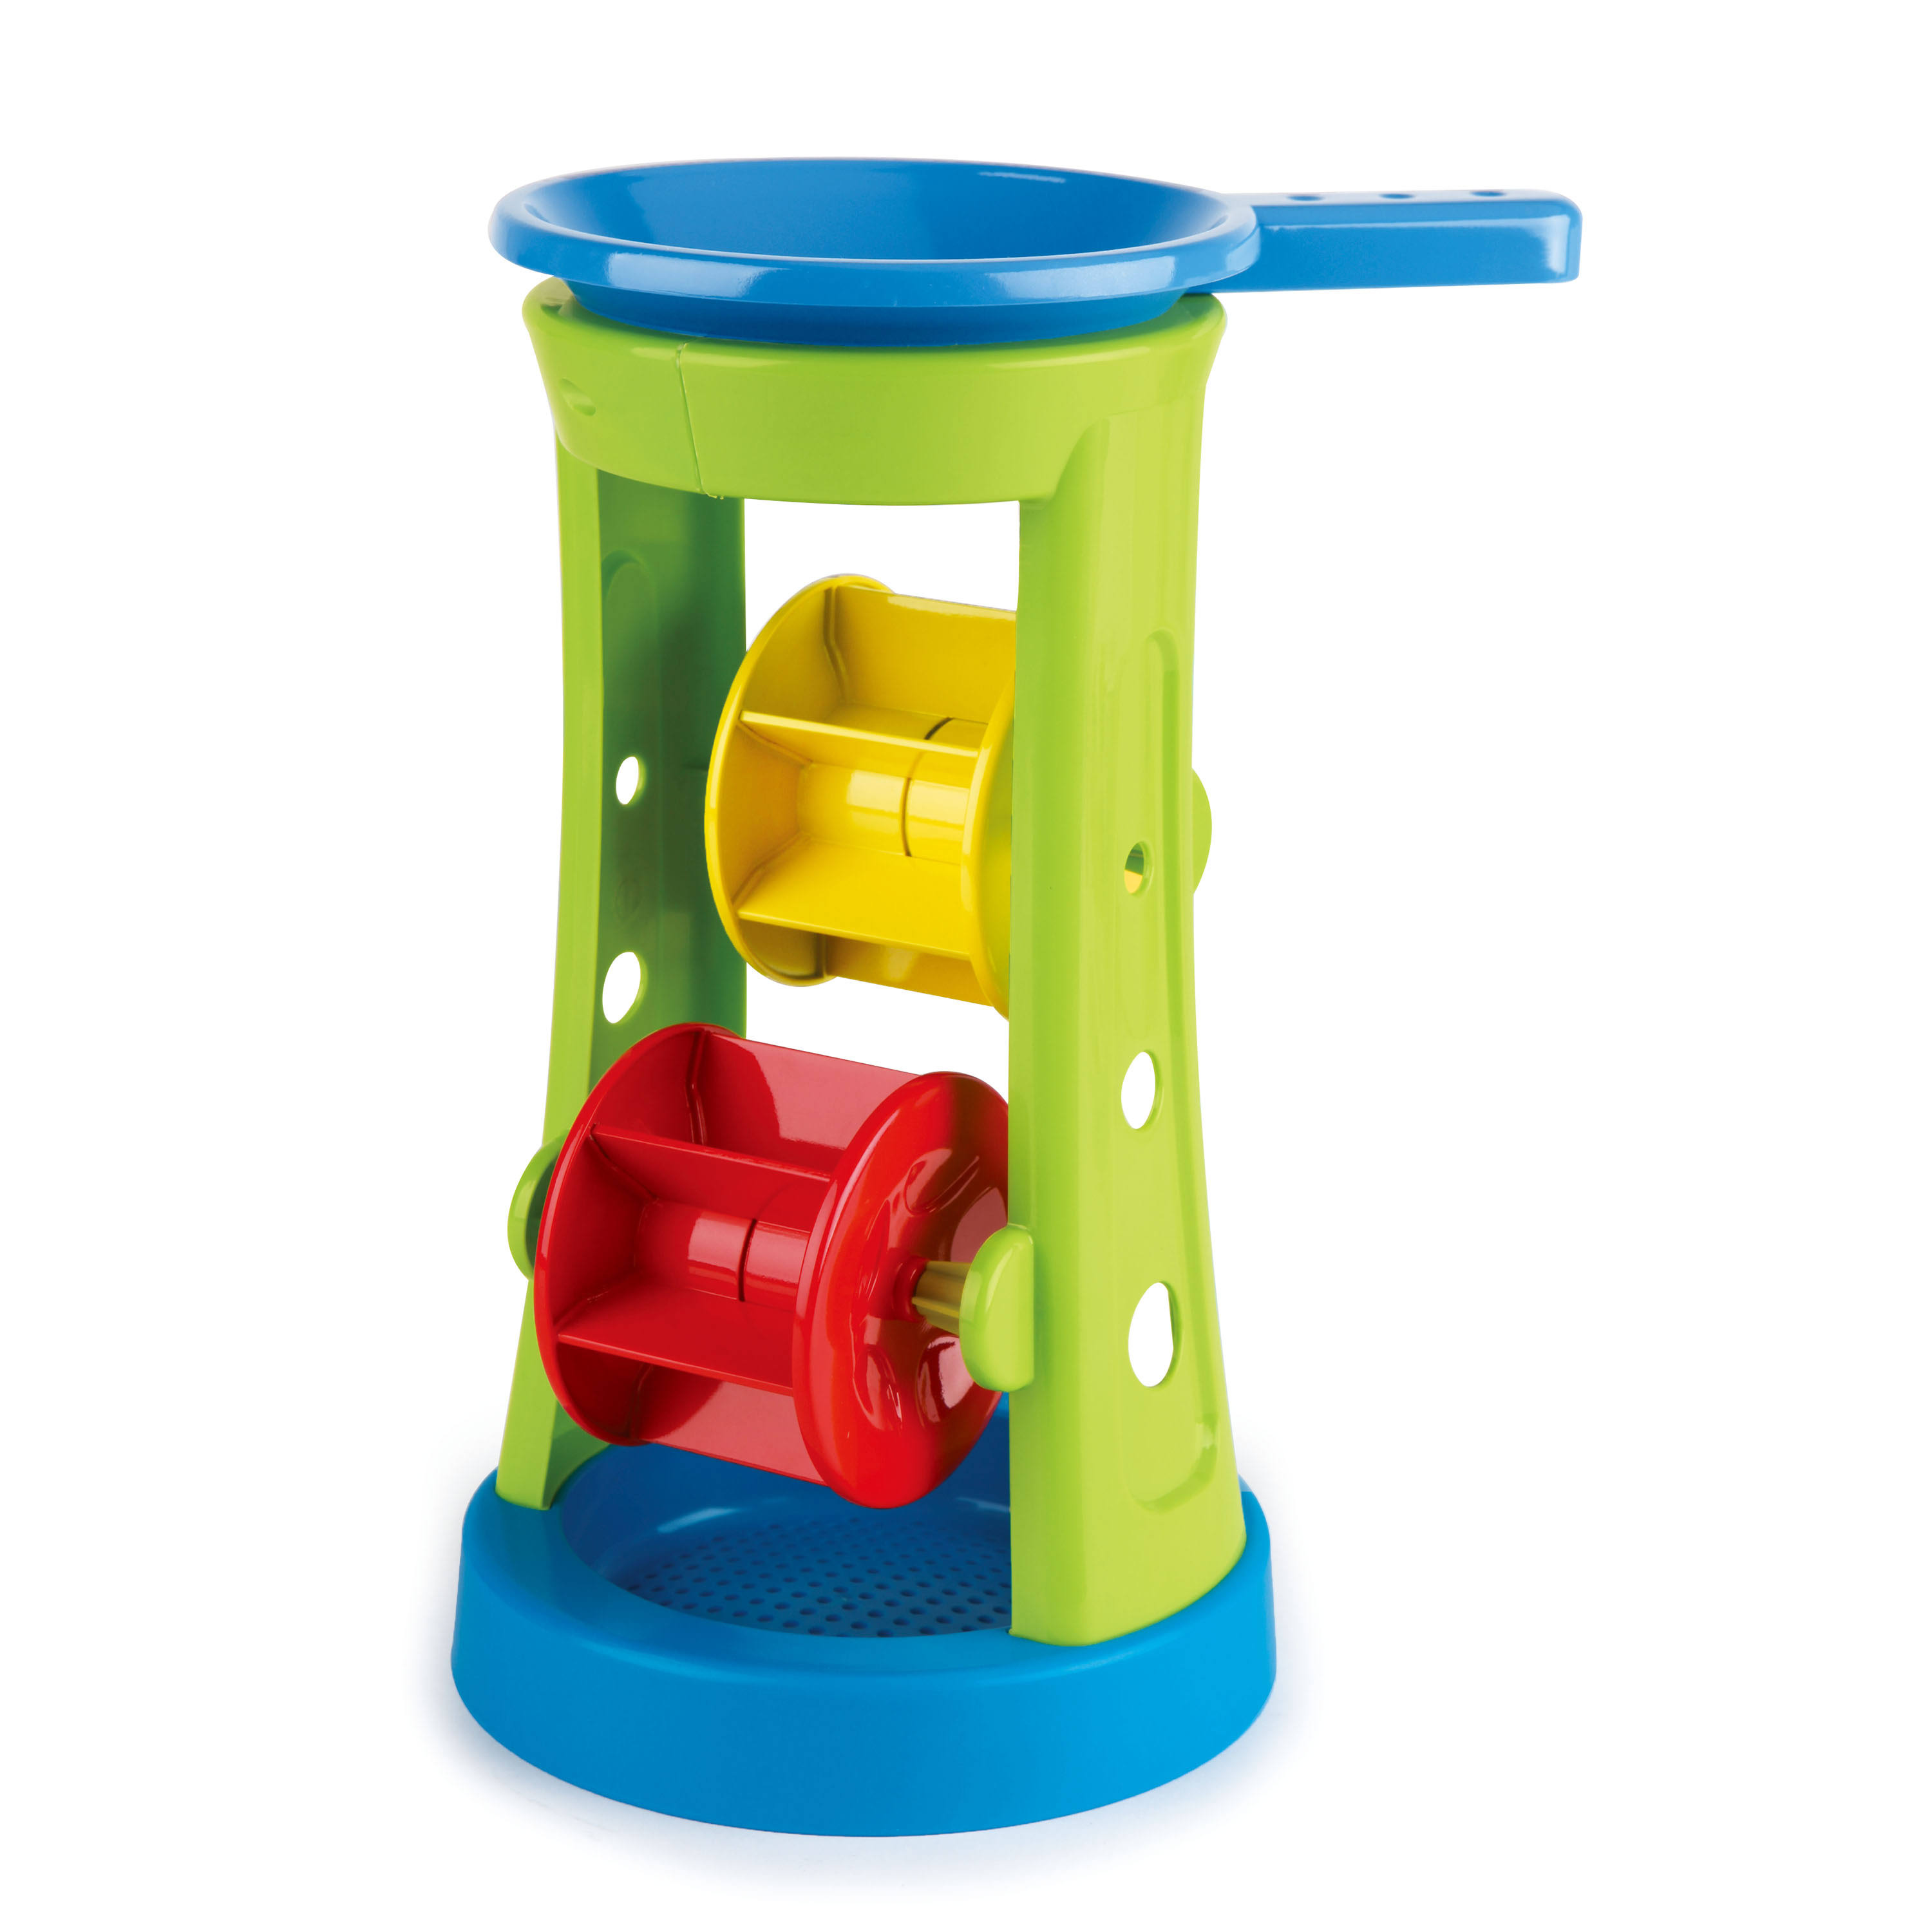 Hape Double Sand and Water Wheel Toy